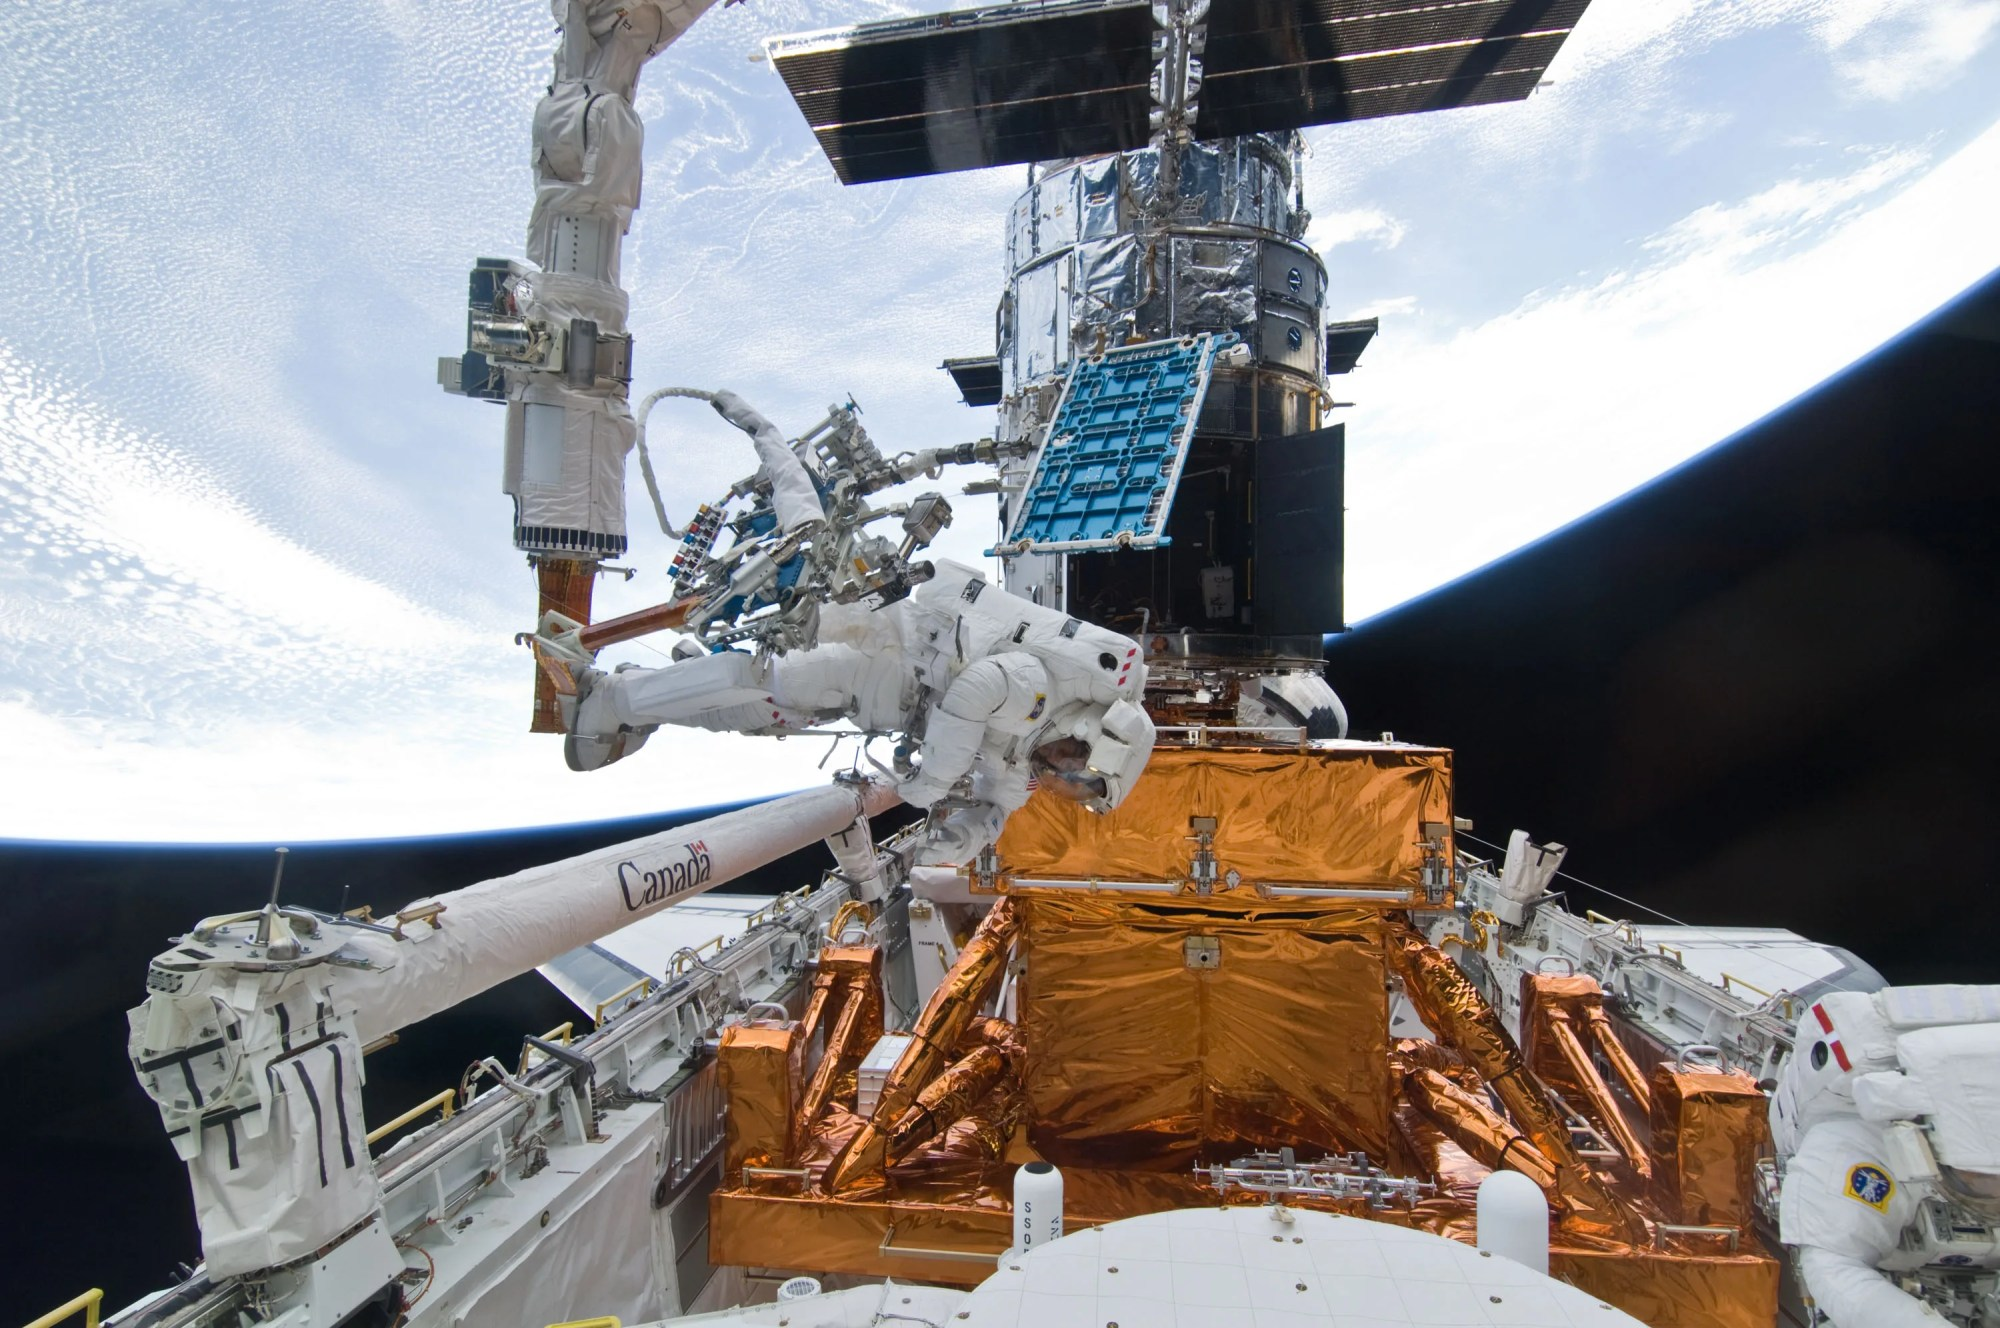 Two astronauts in white space suits on an EVA working to maintain the Hubble Space Telescope.